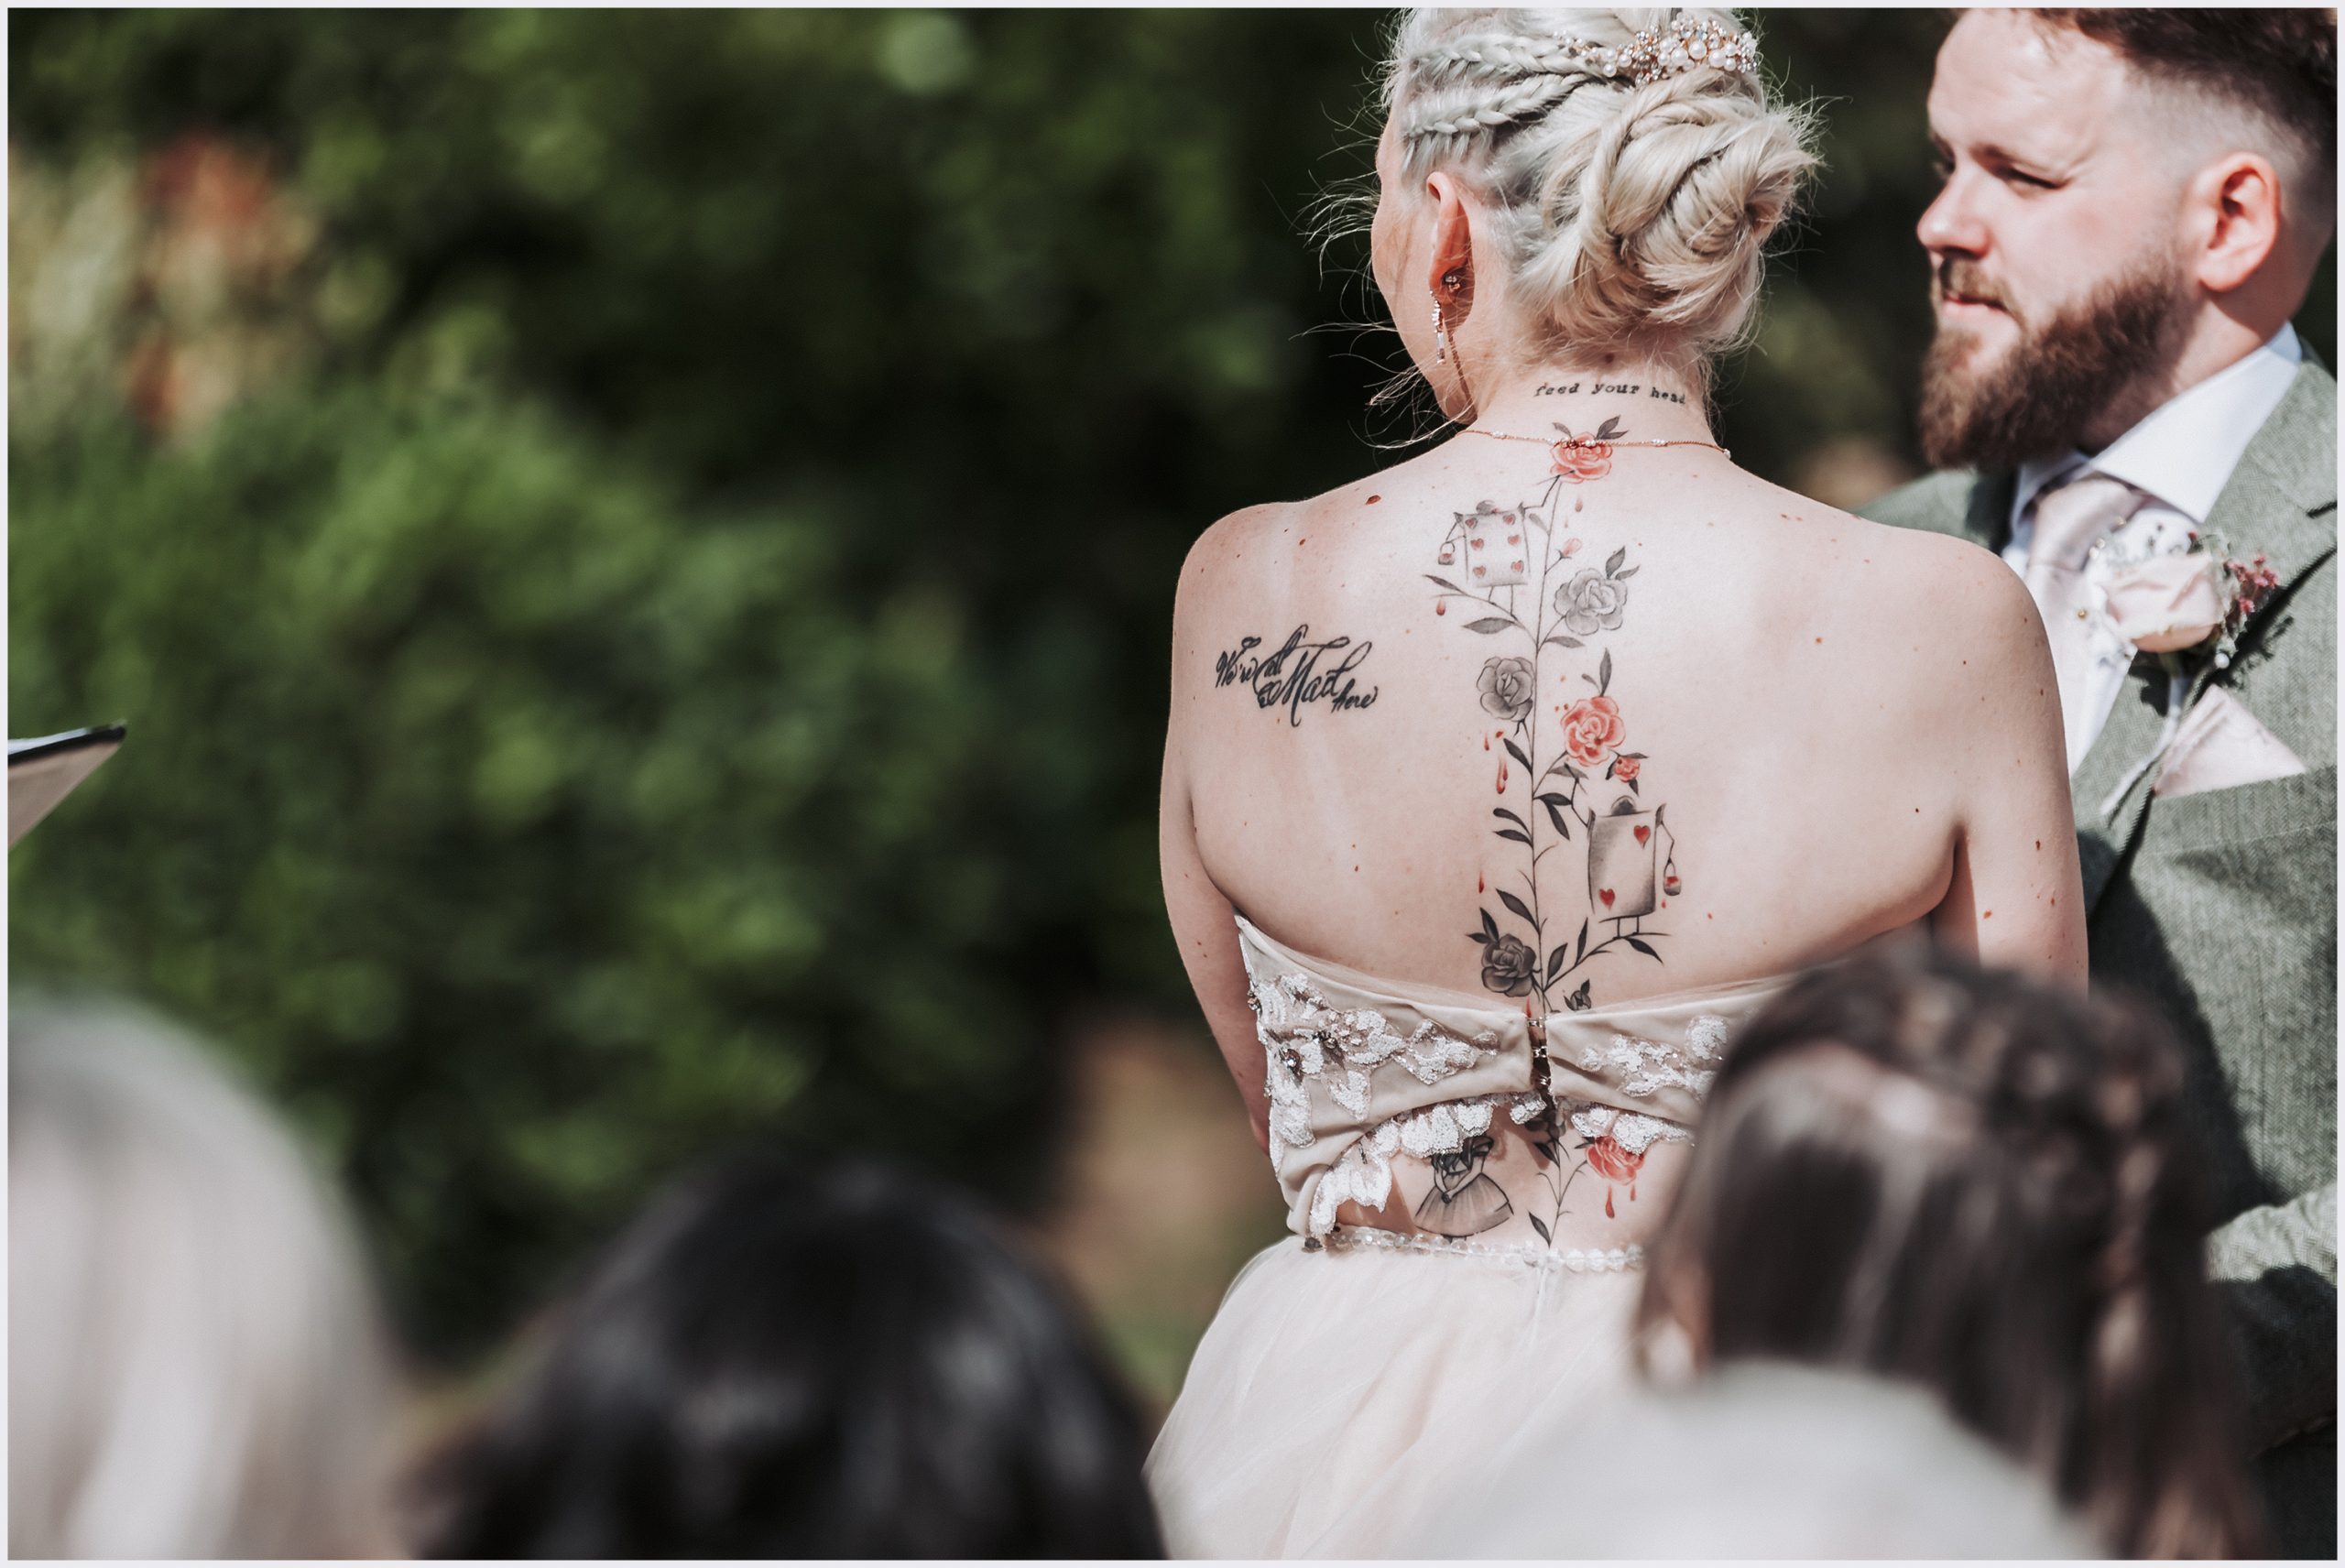 A close up shot of a bride's beautiful tattooed back during the outdoor ceremony at The Grosvenor Pulford Hotel and Spa